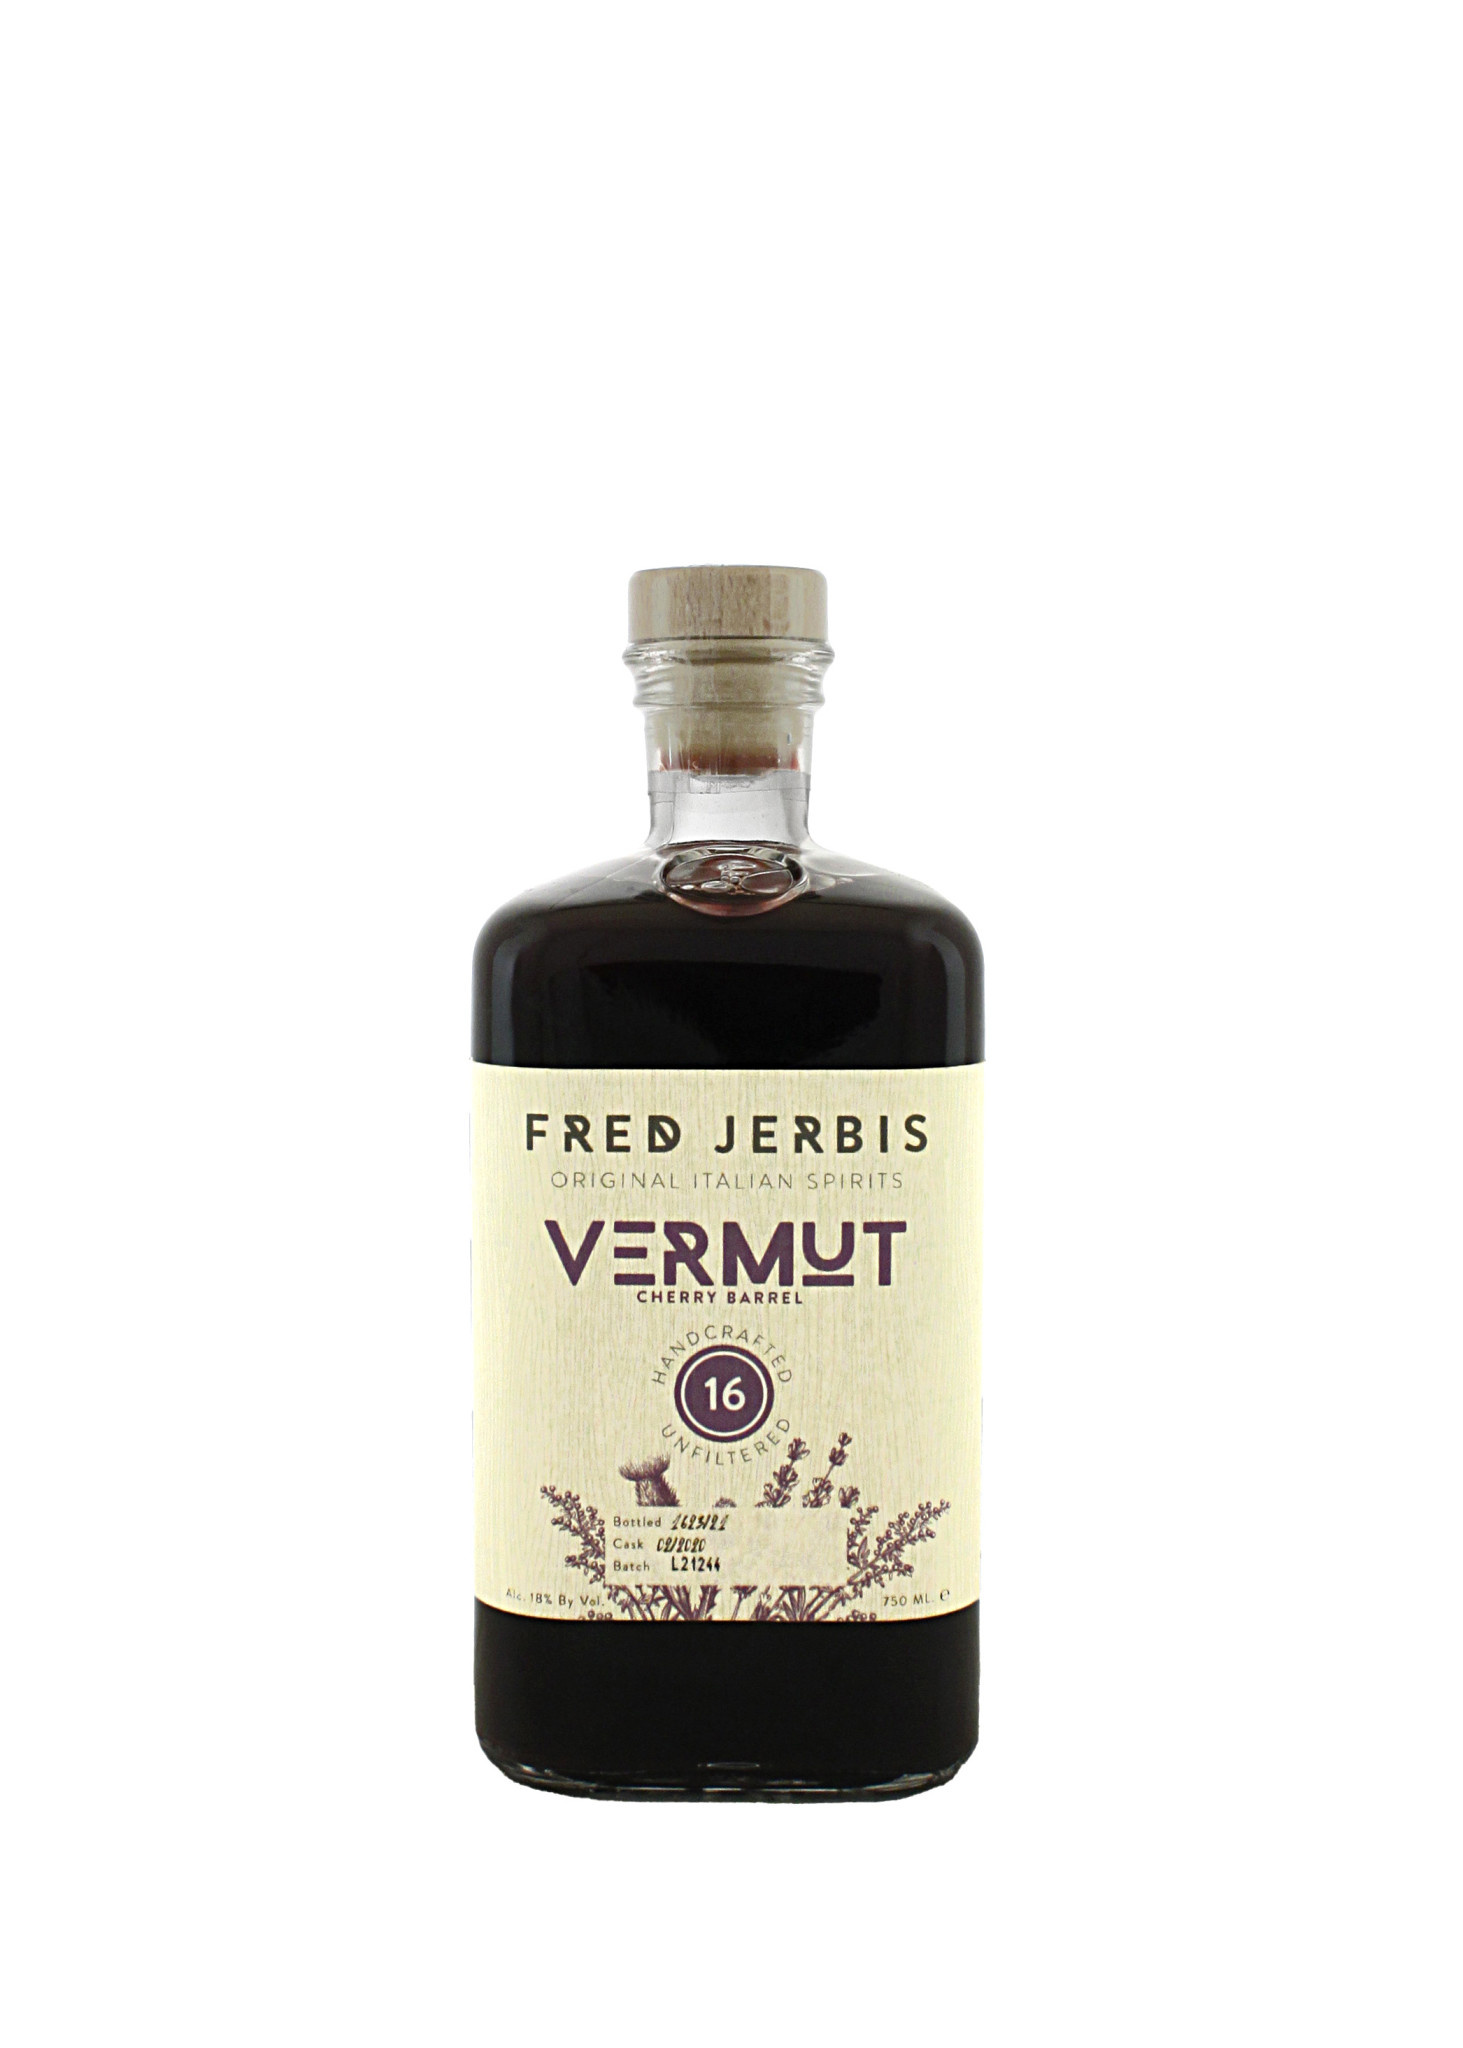 The - Vermouth Italy Cherry Barrel, Country Jerbis \